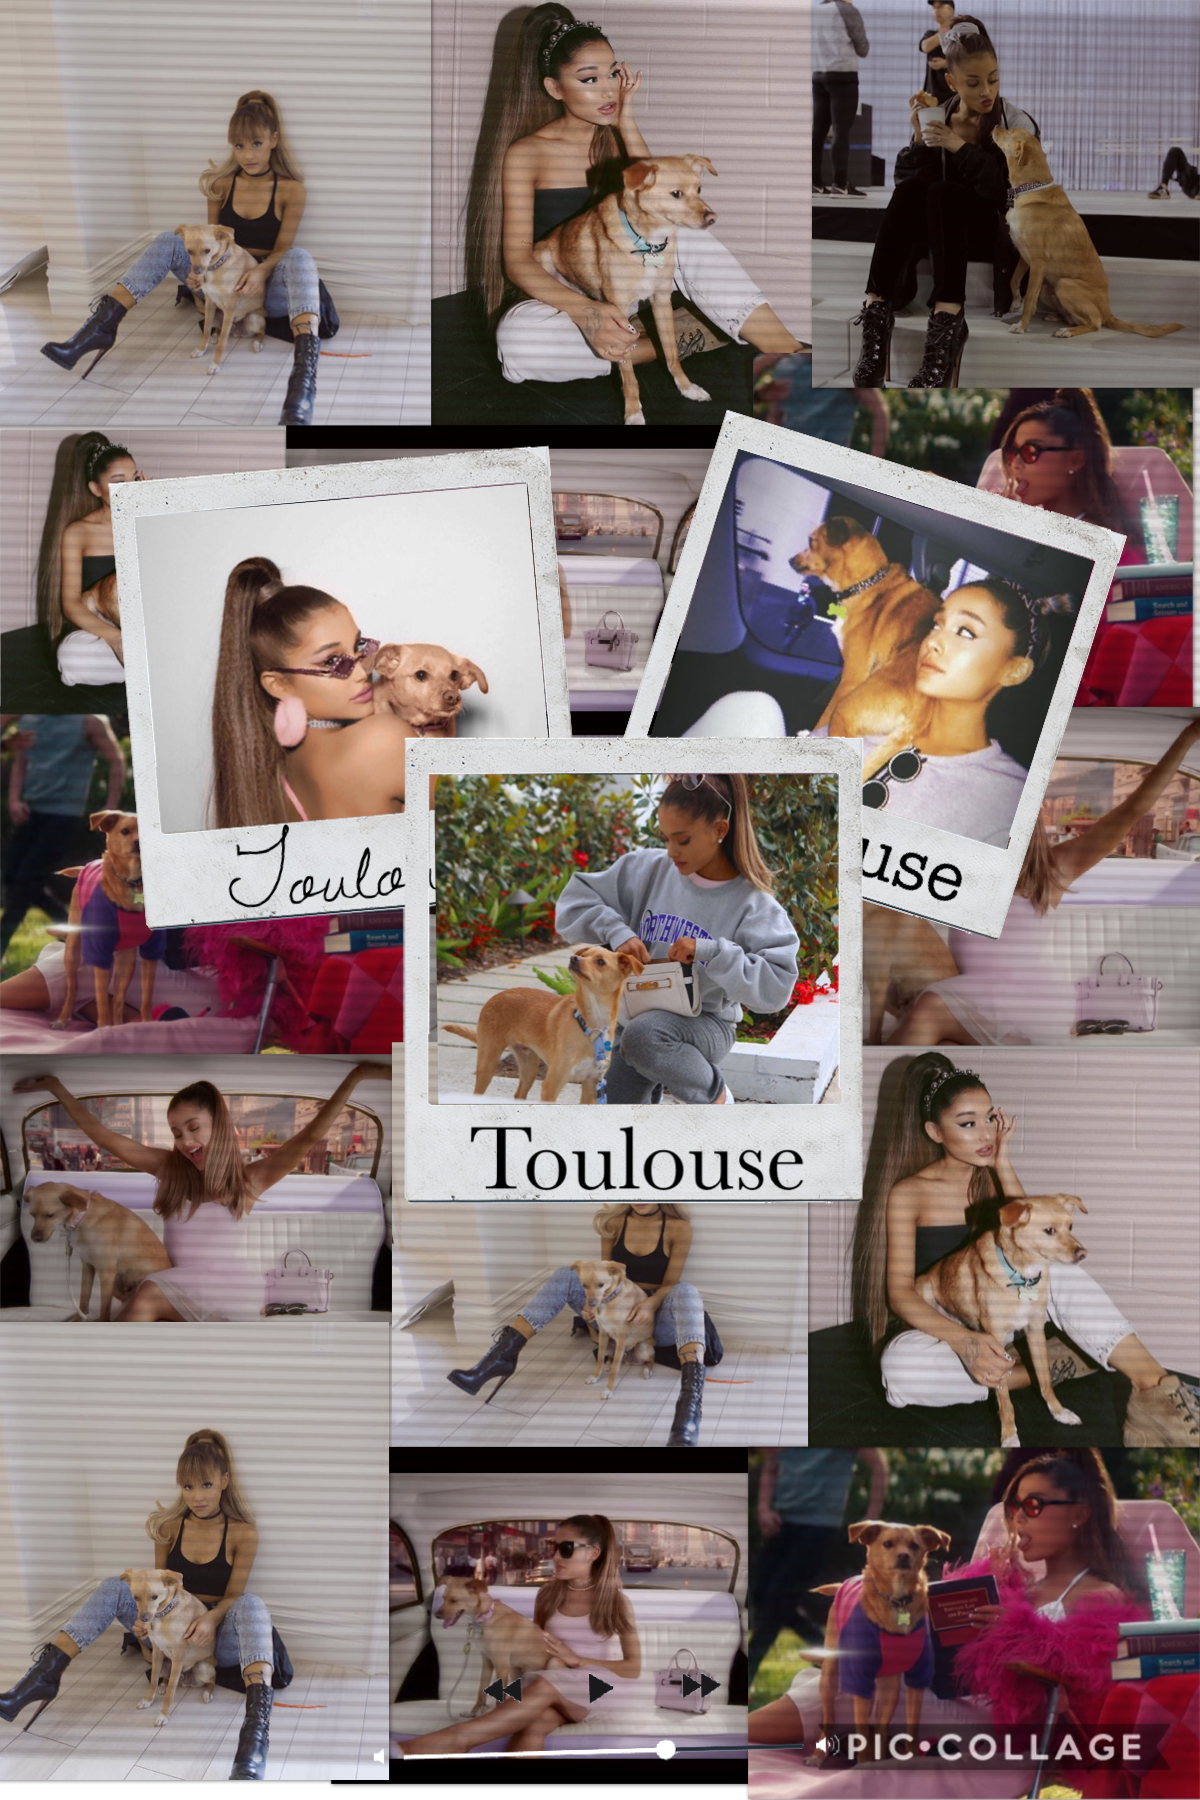 🐶 Toulouse 🐶